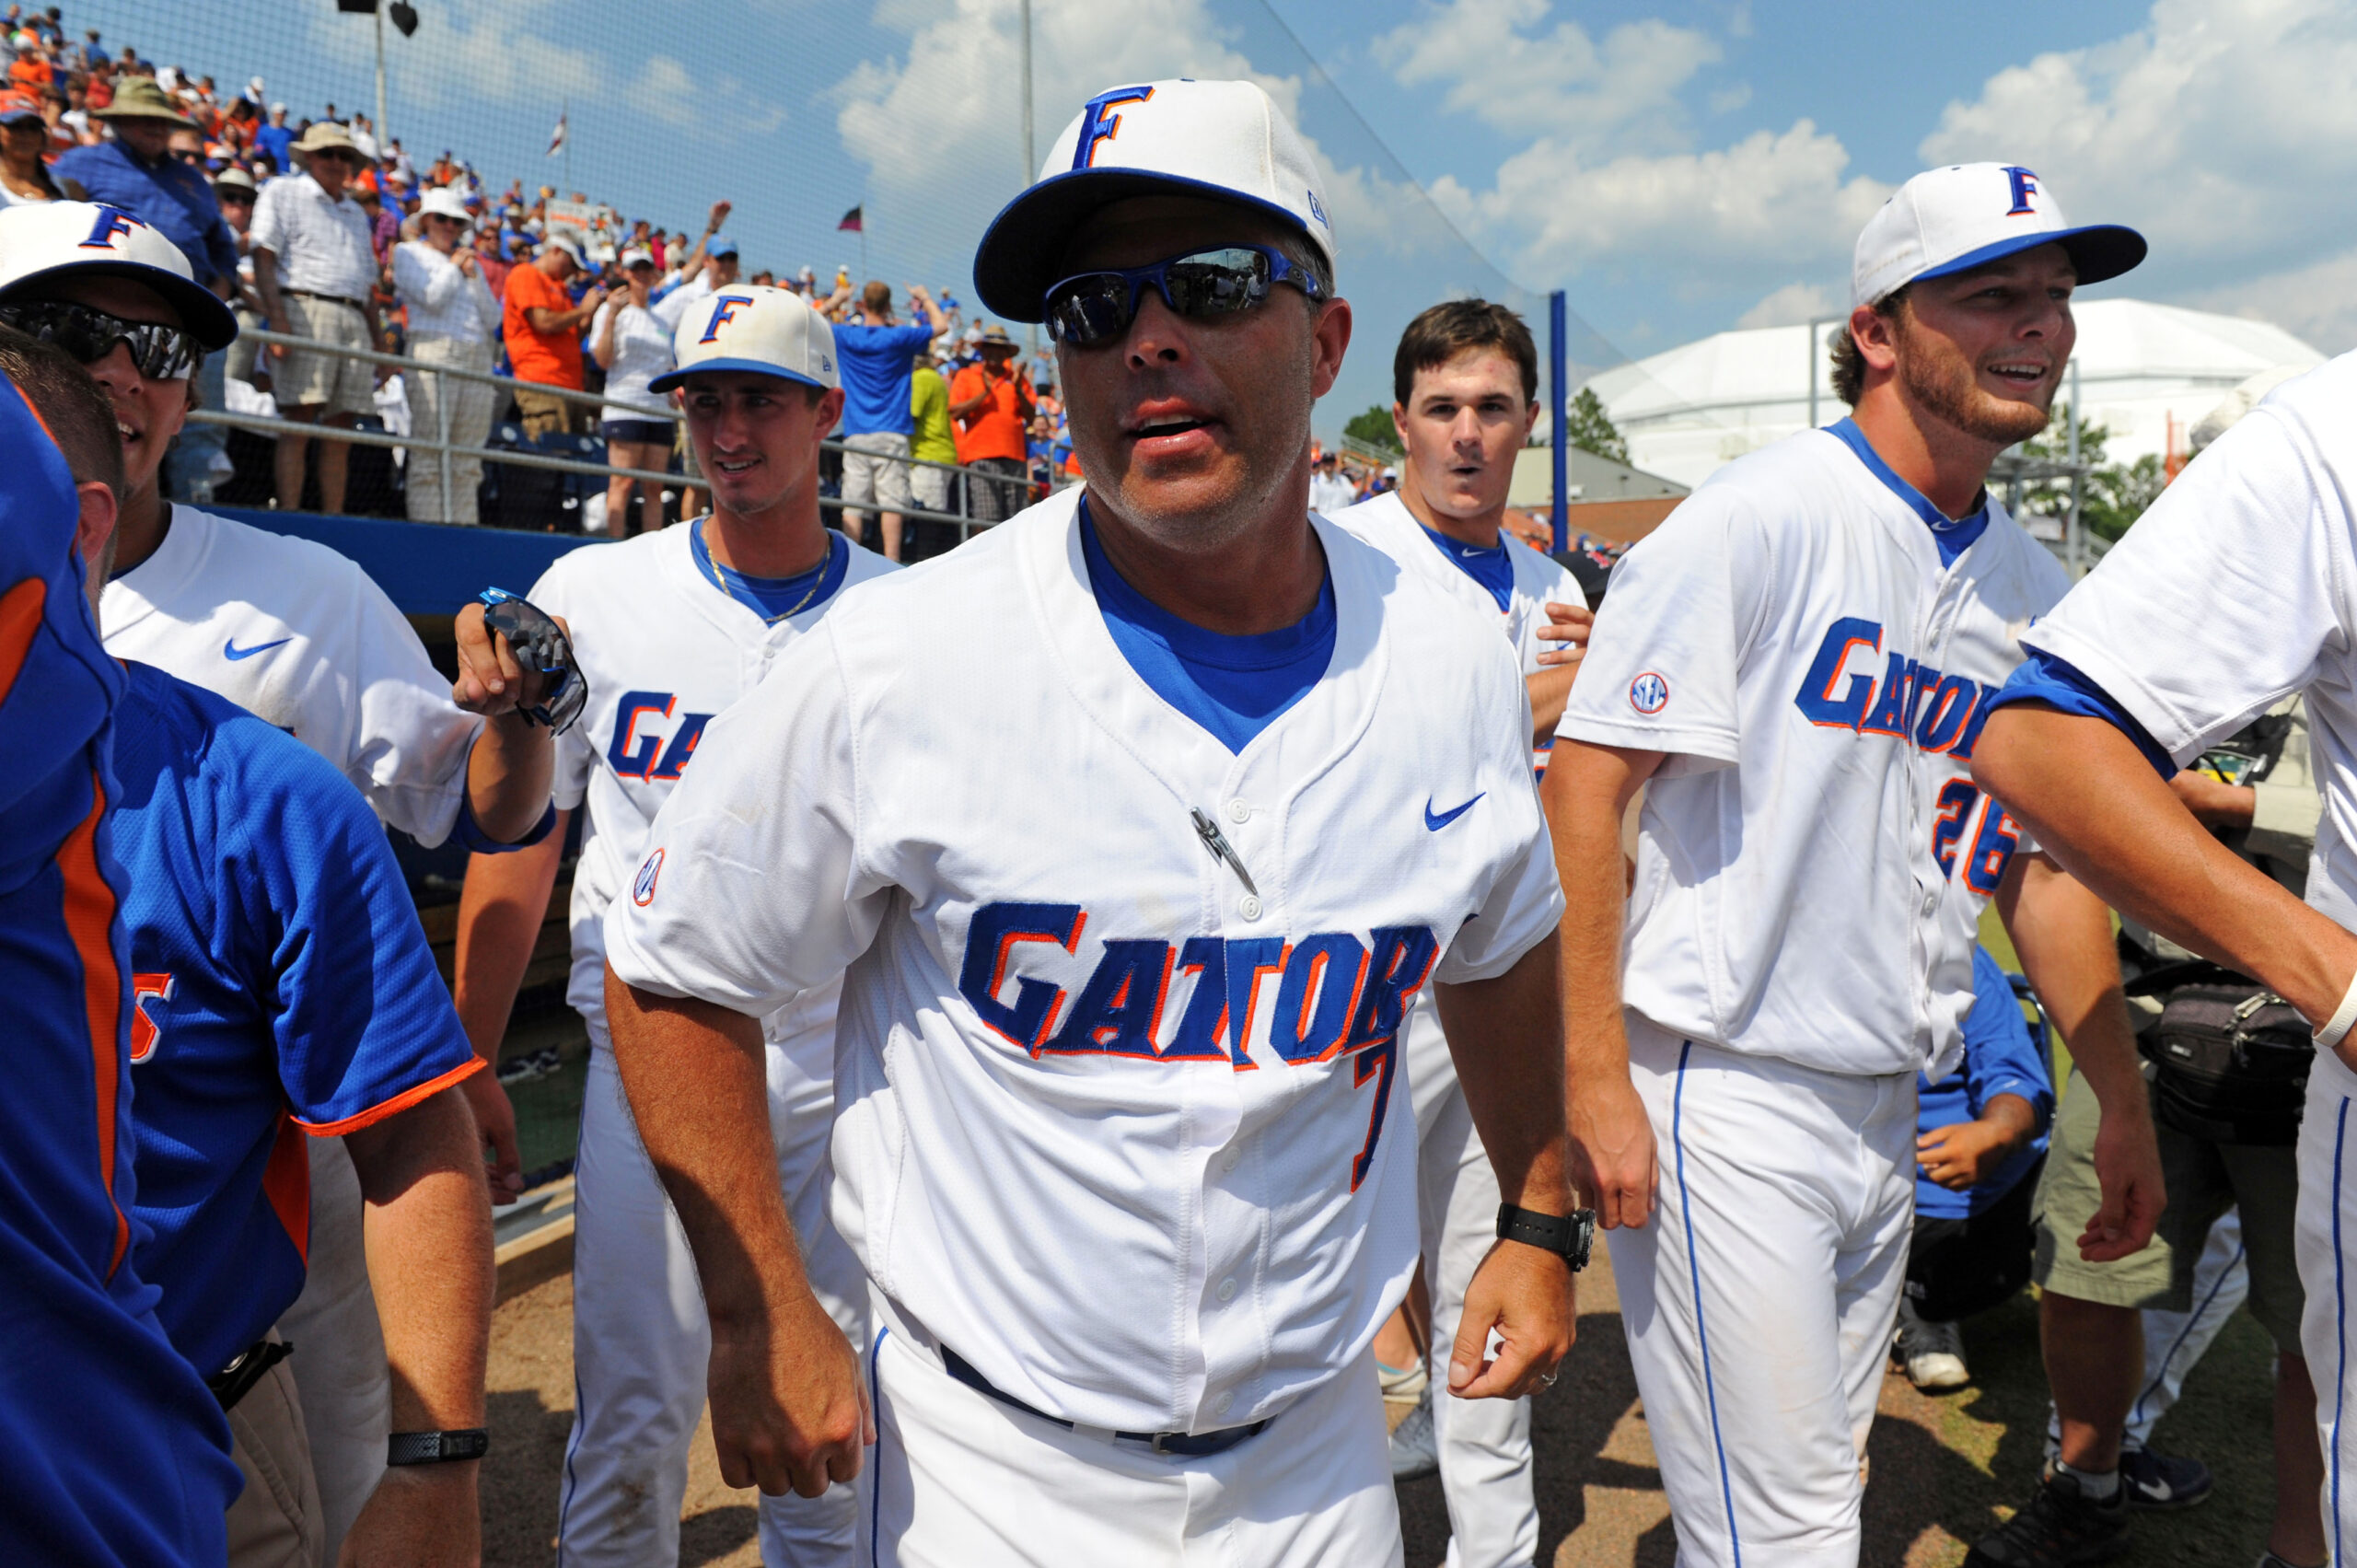 Game Preview: Gators looking to sweep season series against Stetson